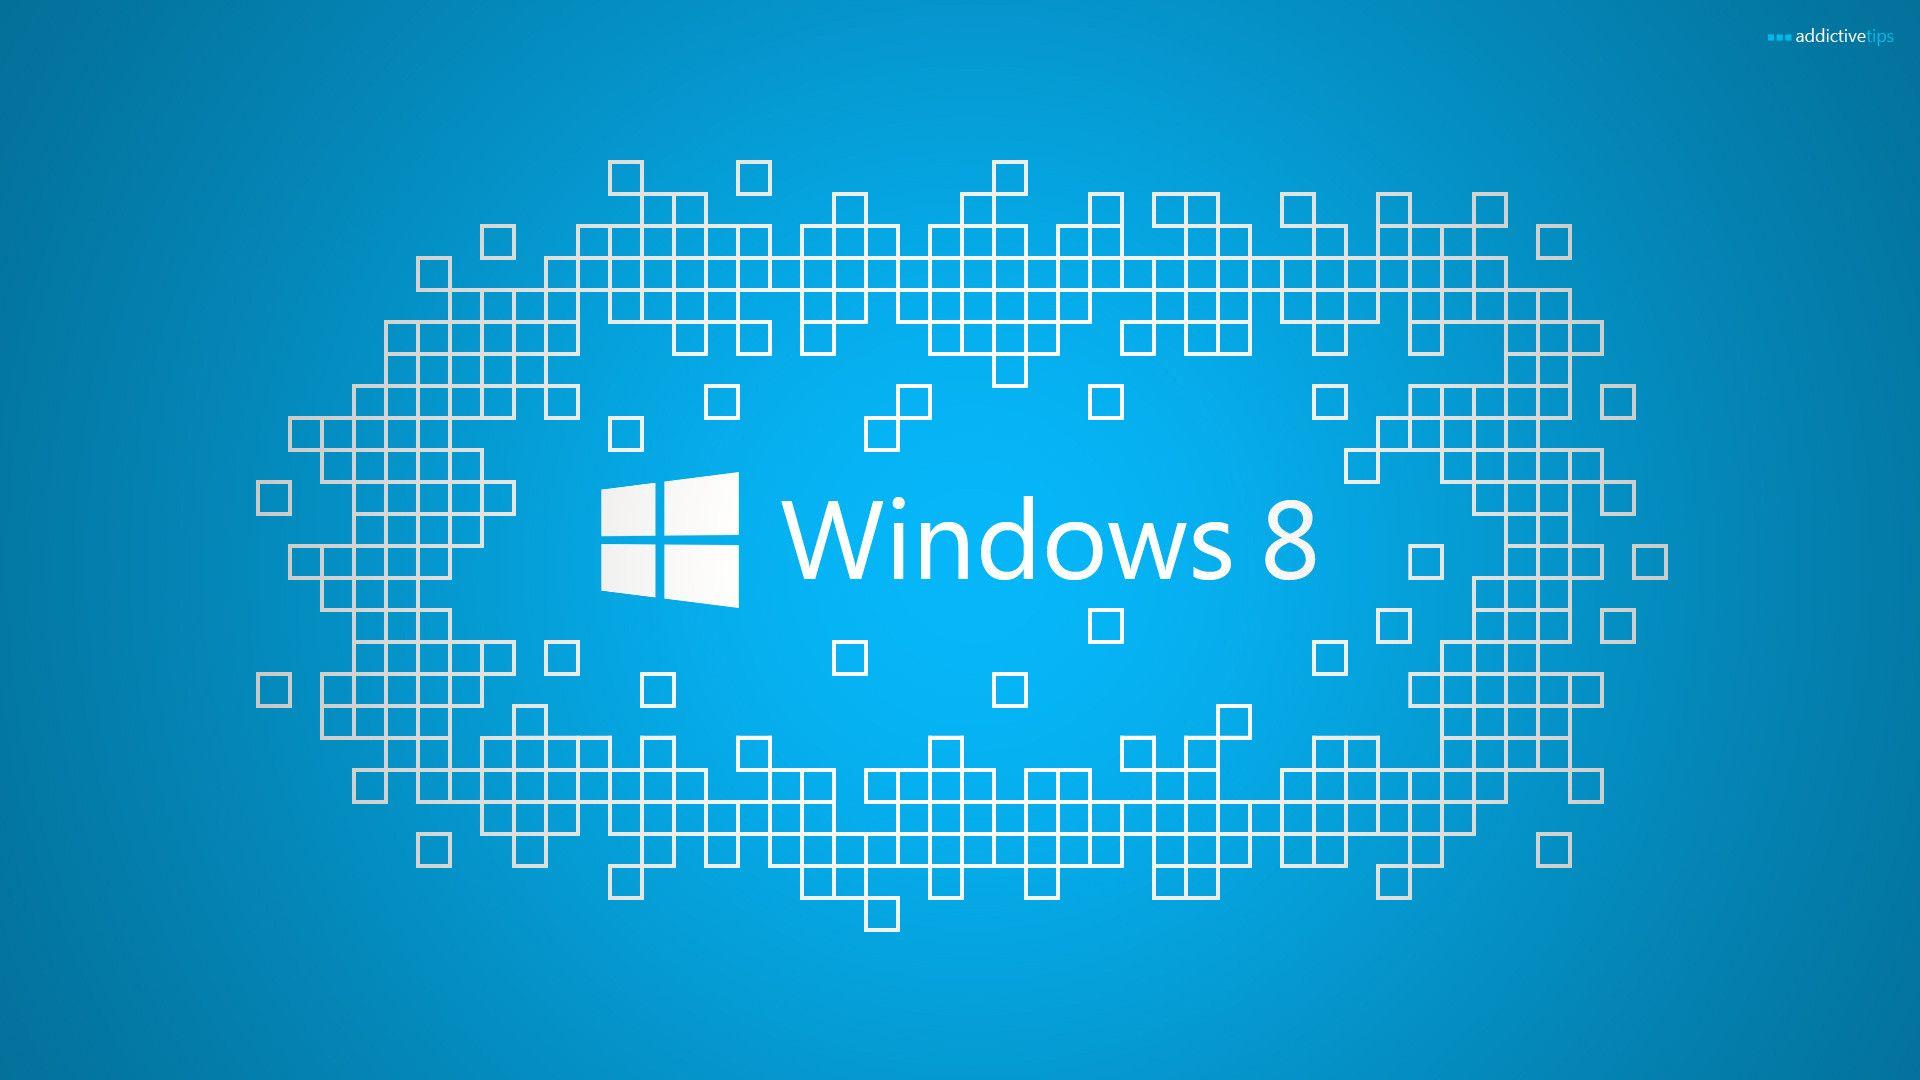 Windows 8 Wallpapers 1920x1080 - Wallpaper Cave Full Hd Wallpapers For Windows 8 1920x1080